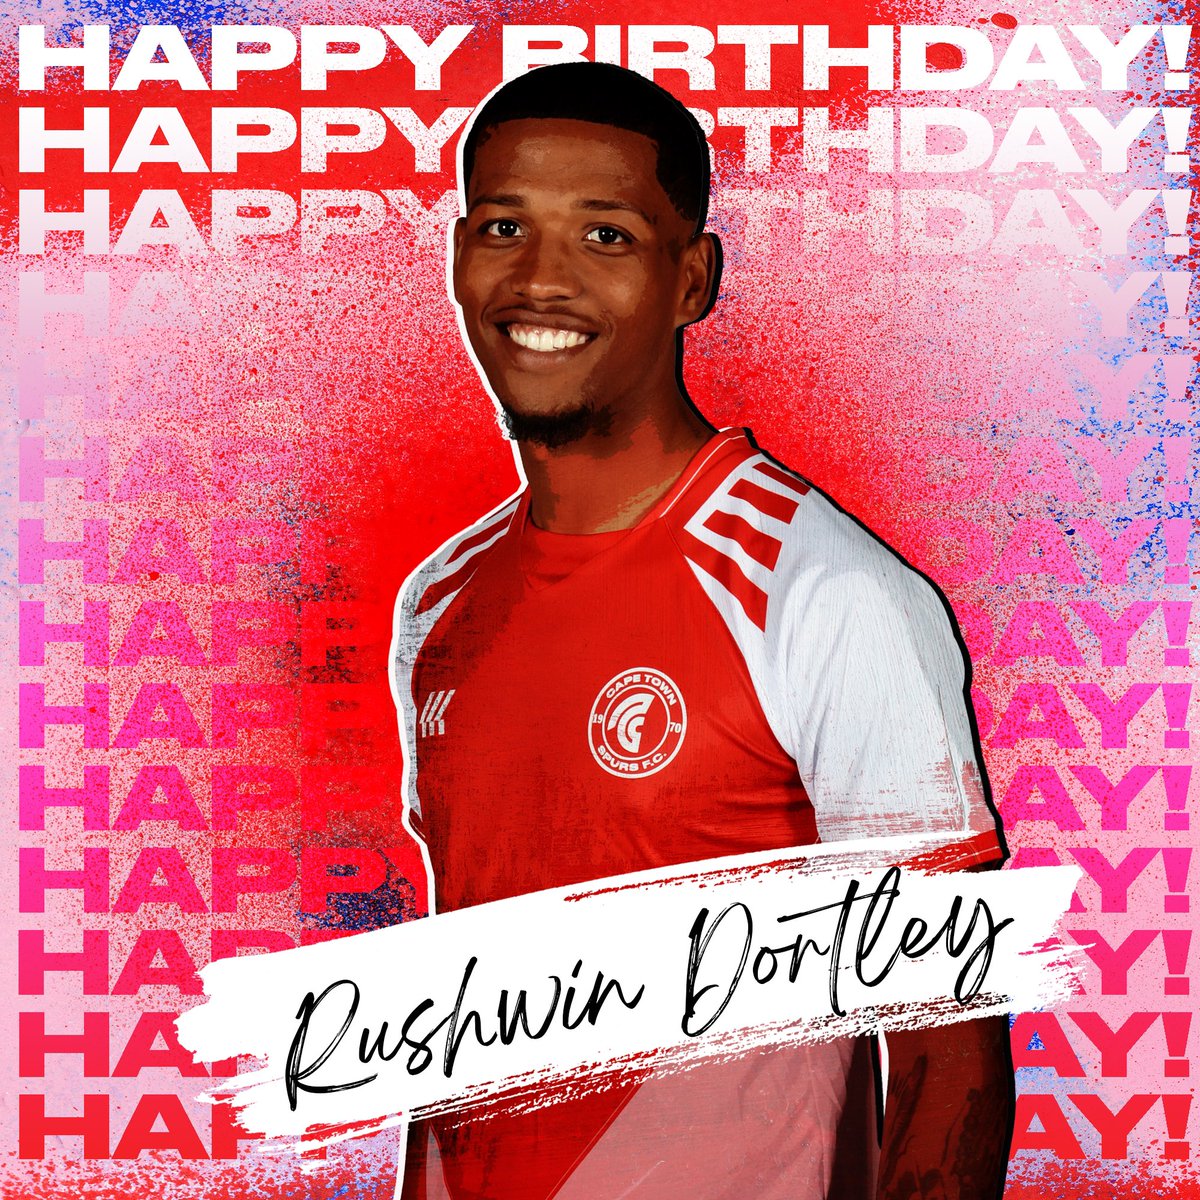 Happy Birthday, Rushwin ! 🎂🎉 #CAPETOWNSPURS #URBANWARRIORS #PSL #DSTVPREMIERSHIP #OURYOUTHOURFUTURE #CAPETOWN #SOUTHAFRICA